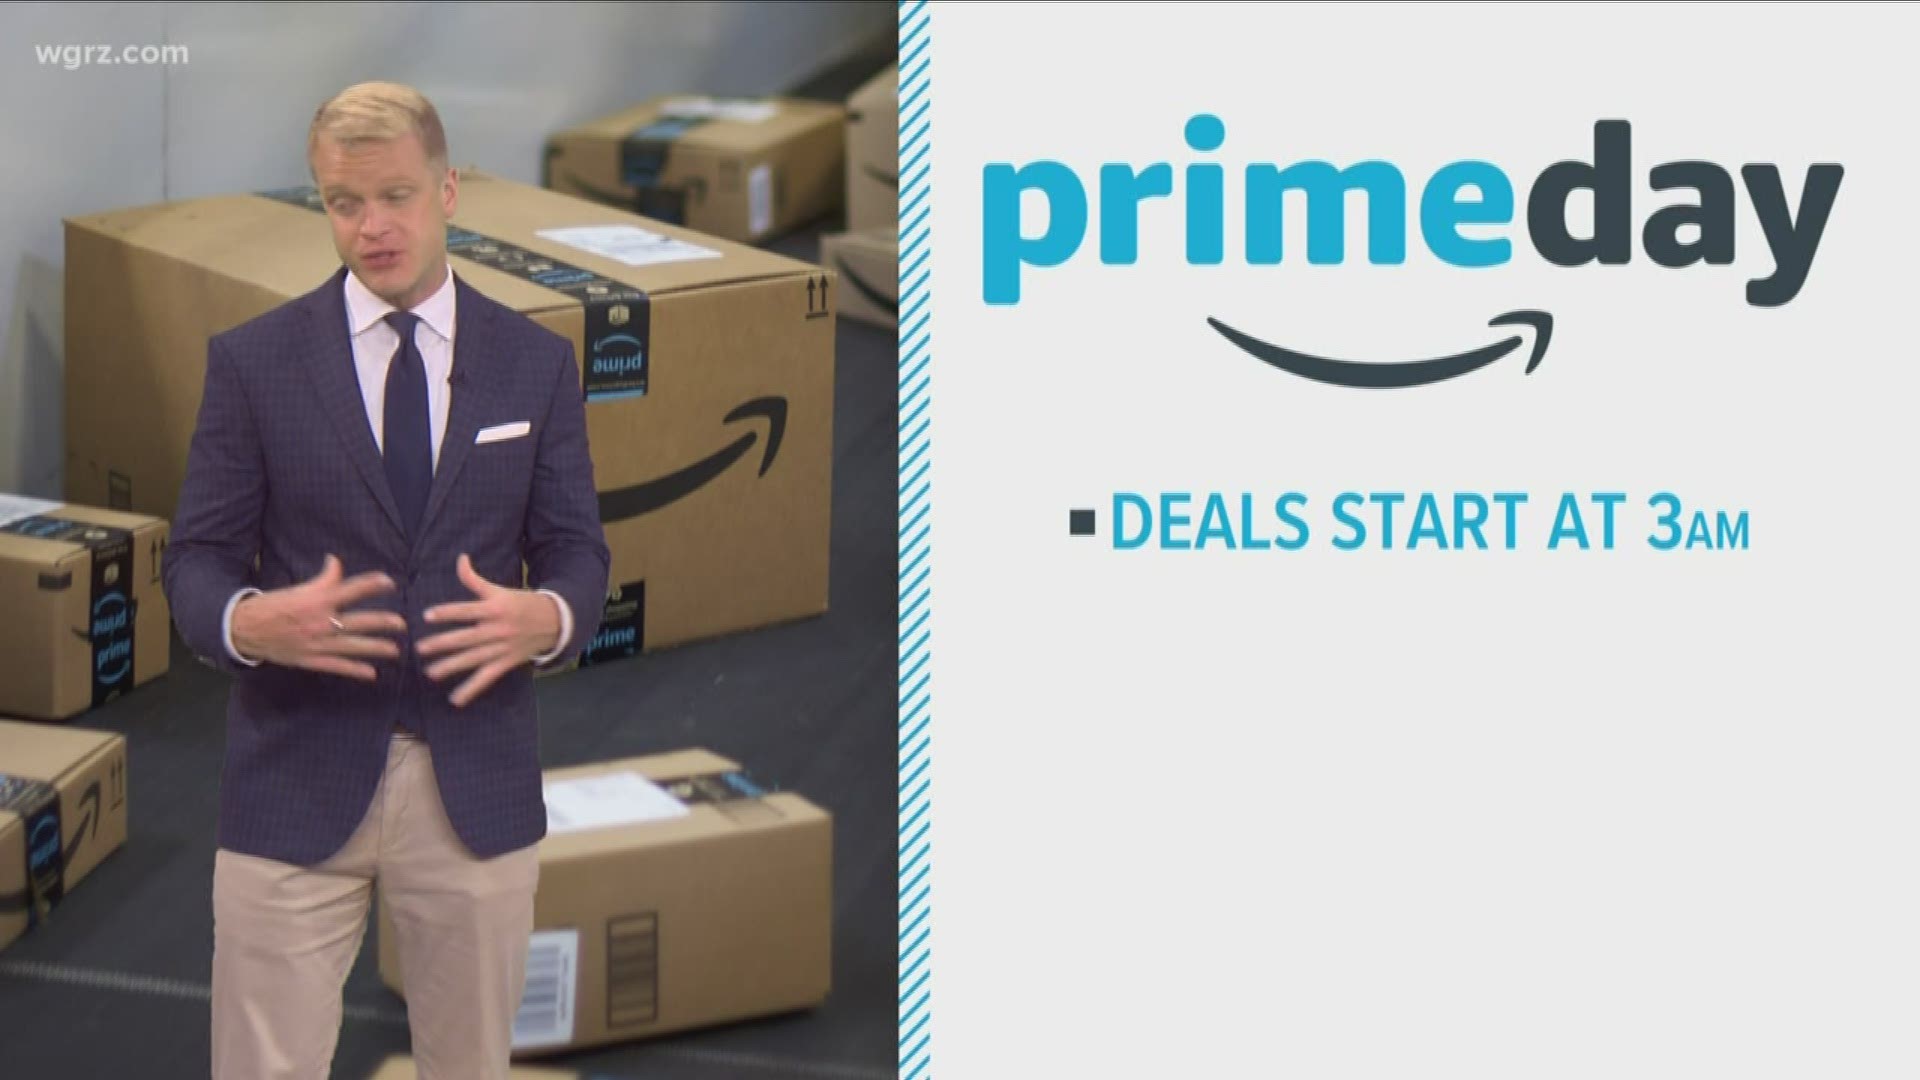 Amazon Prime day starts tomorrow and ends on Tuesday.